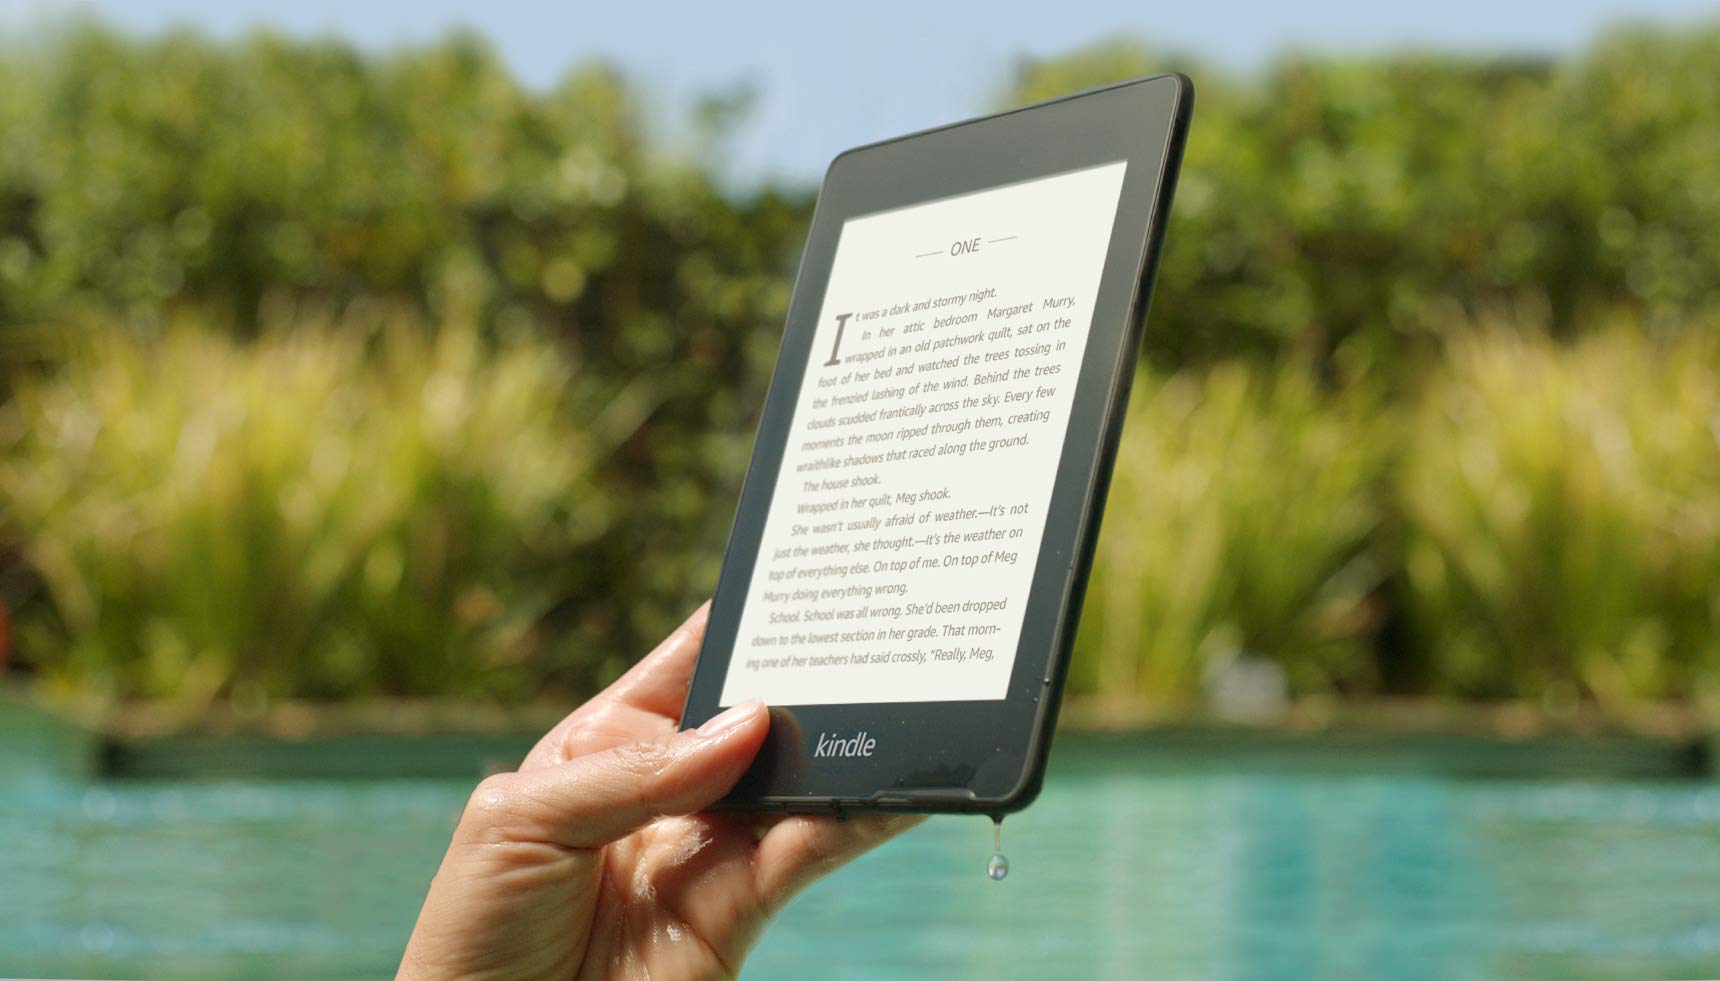 Kindle Paperwhite – (previous generation - 2018 release) Waterproof with more than 2x the Storage – Ad-Supported